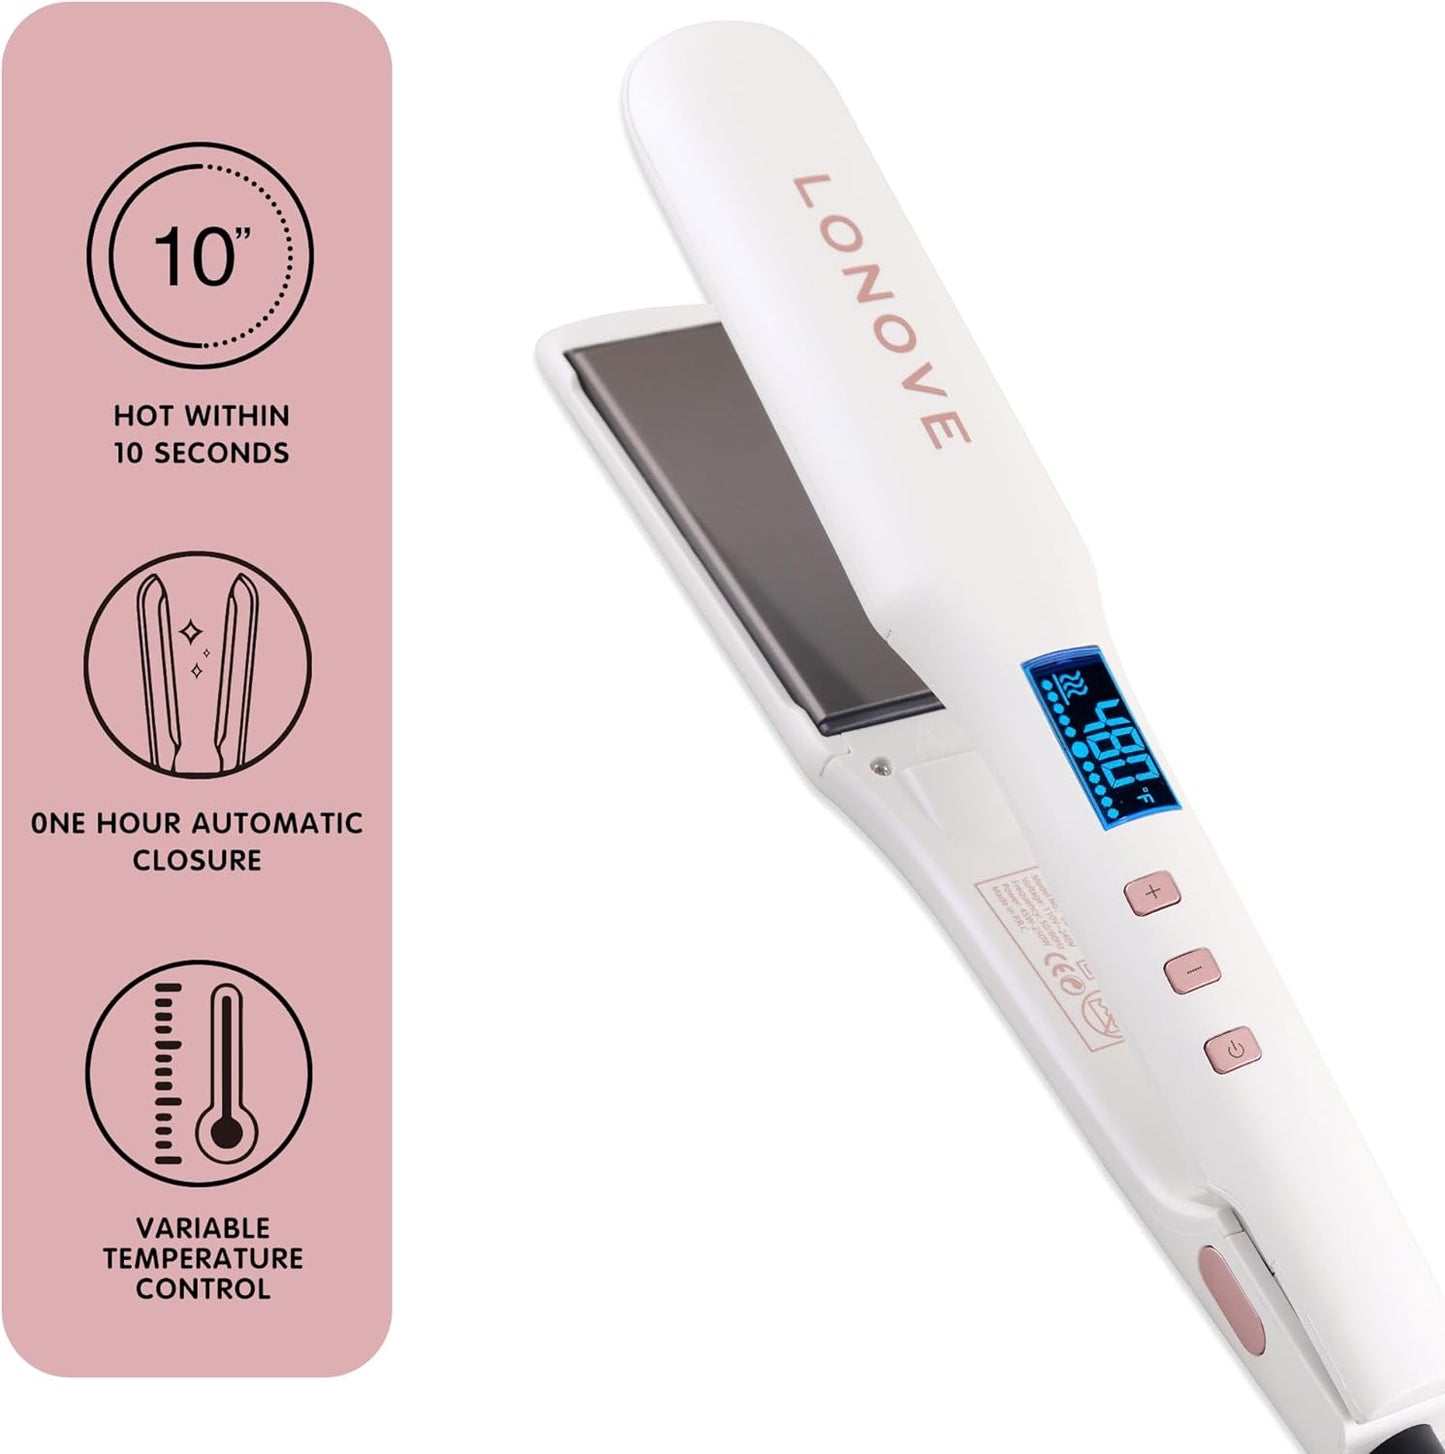 Titanium Wide Plate Hair Straighteners for Thick Hair - Professional Flat Iron Hair Straightener for Women